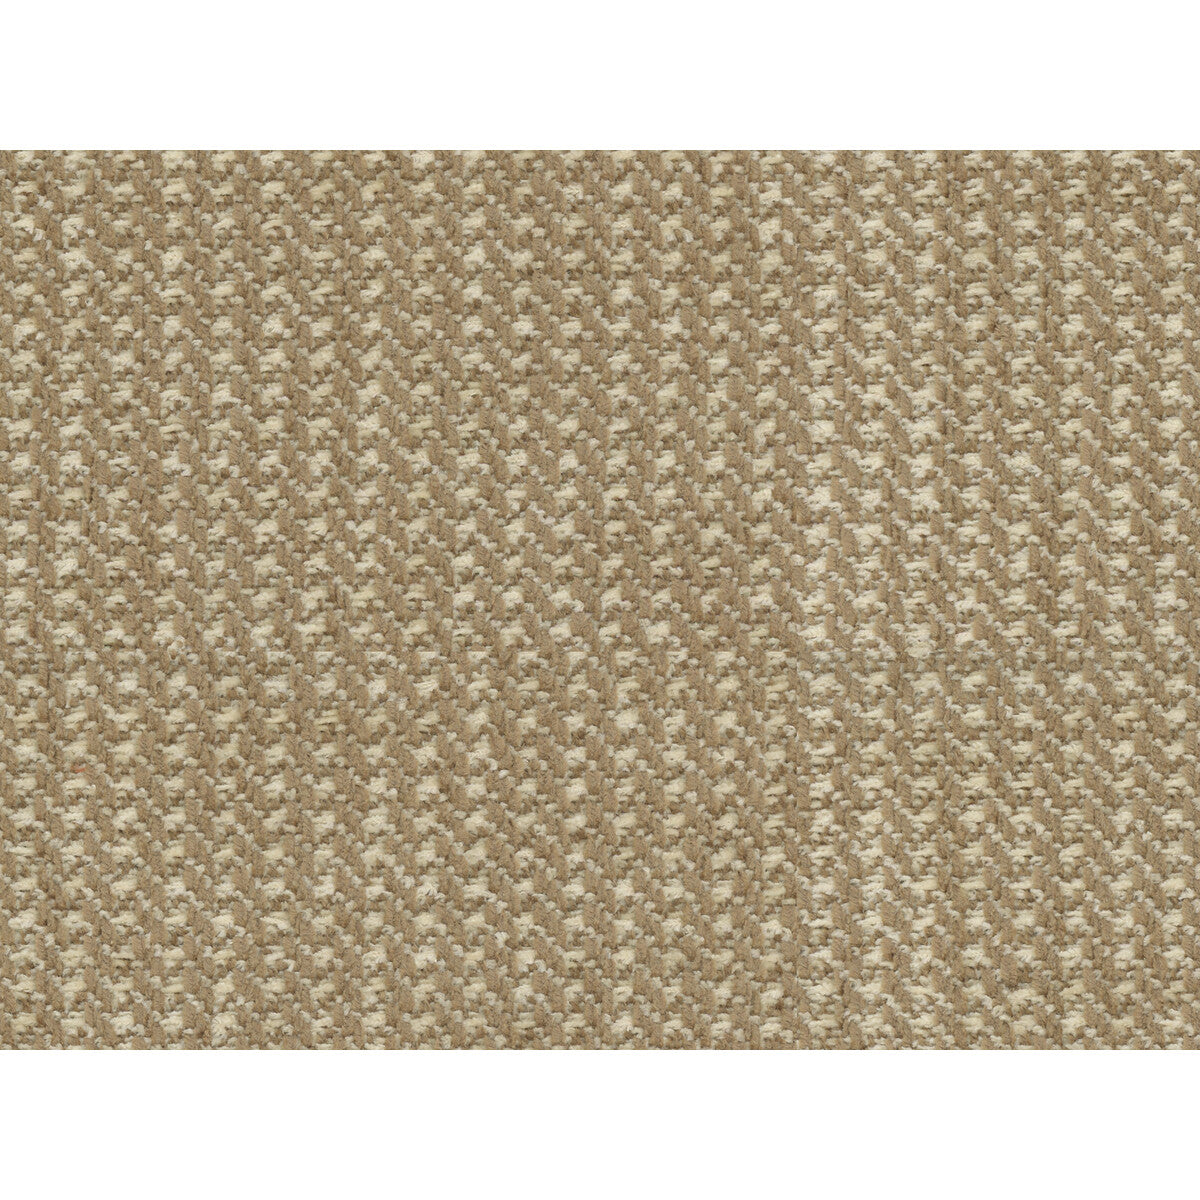 Granier Chenille fabric in toffee color - pattern 8016105.116.0 - by Brunschwig &amp; Fils in the Chambery Textures collection